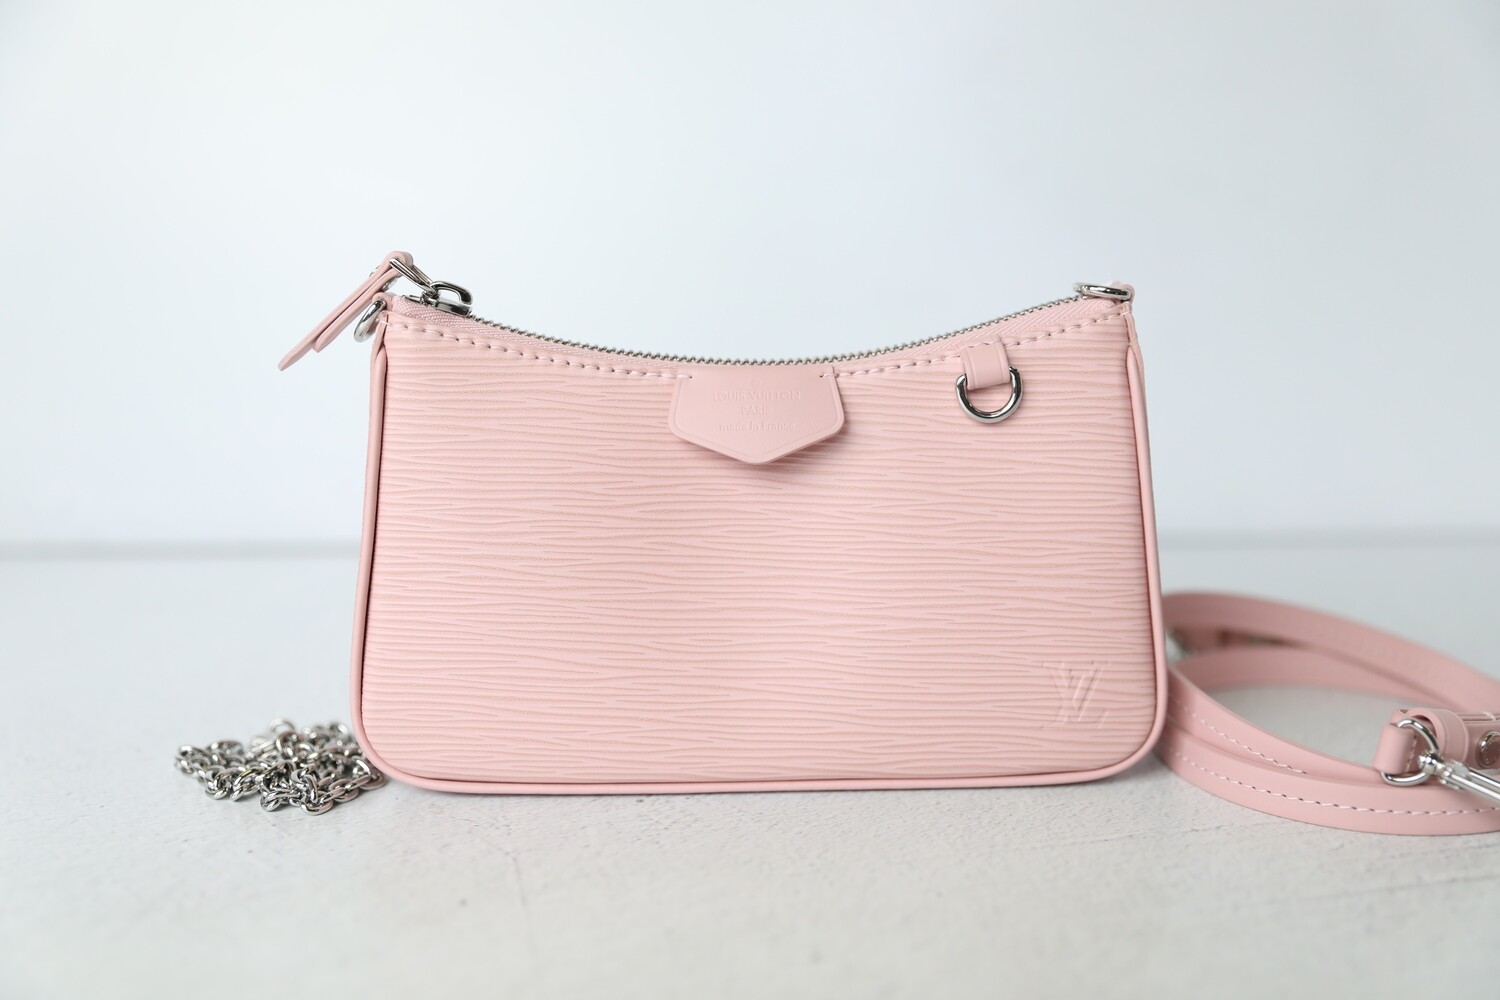 Louis Vuitton Easy Pouch on Strap, Pink Epi Leather, New in